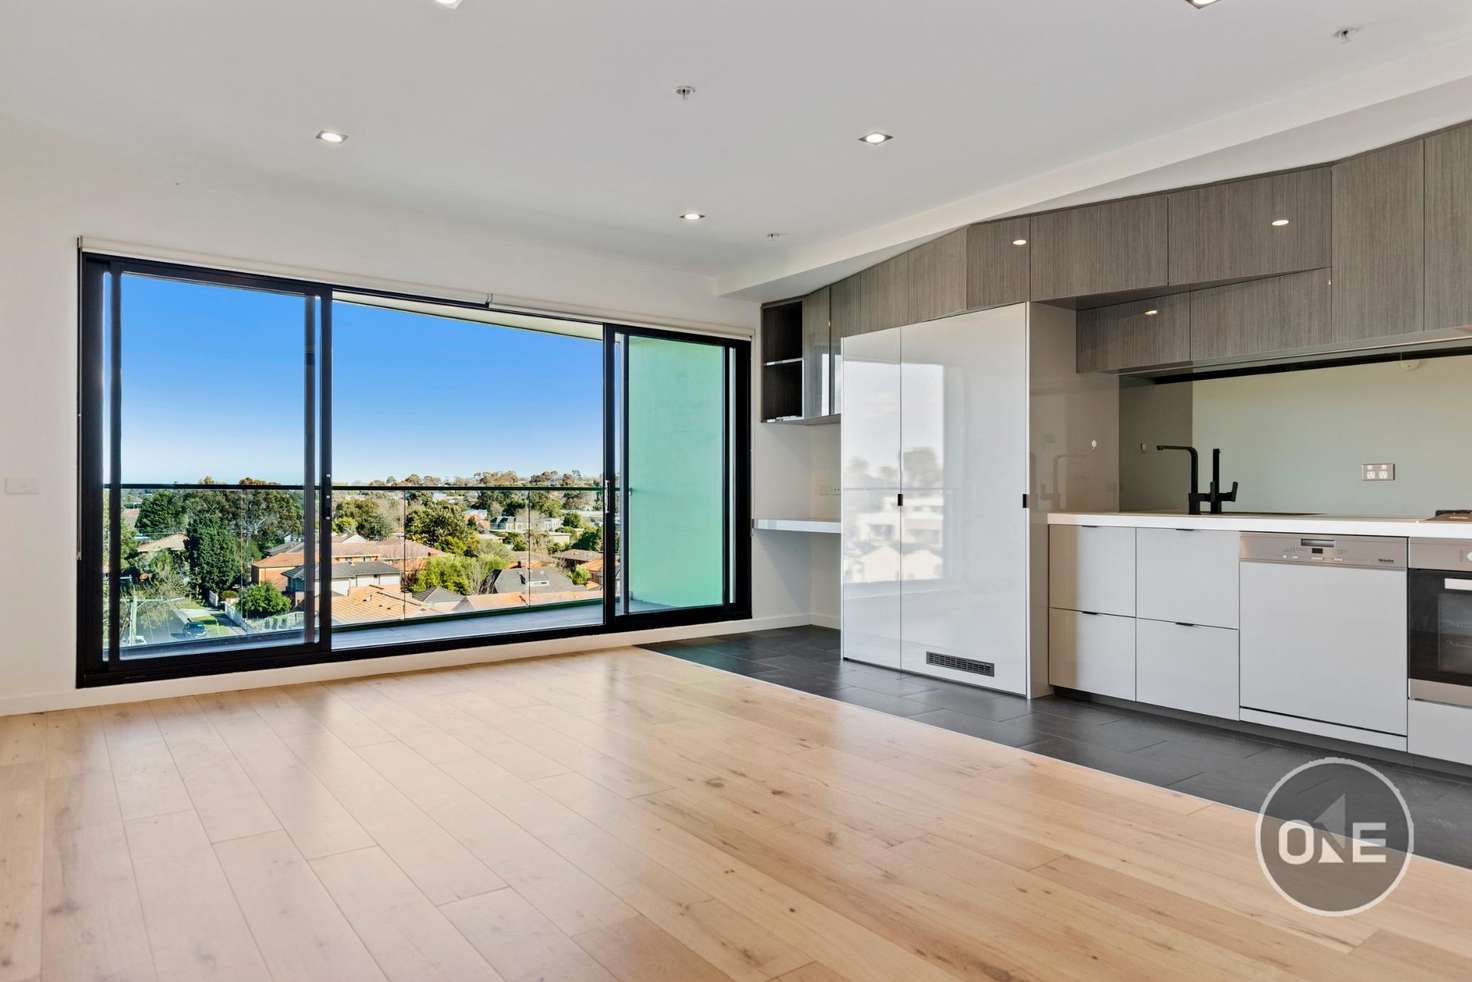 Main view of Homely apartment listing, 413/33 Harrow Street, Box Hill VIC 3128